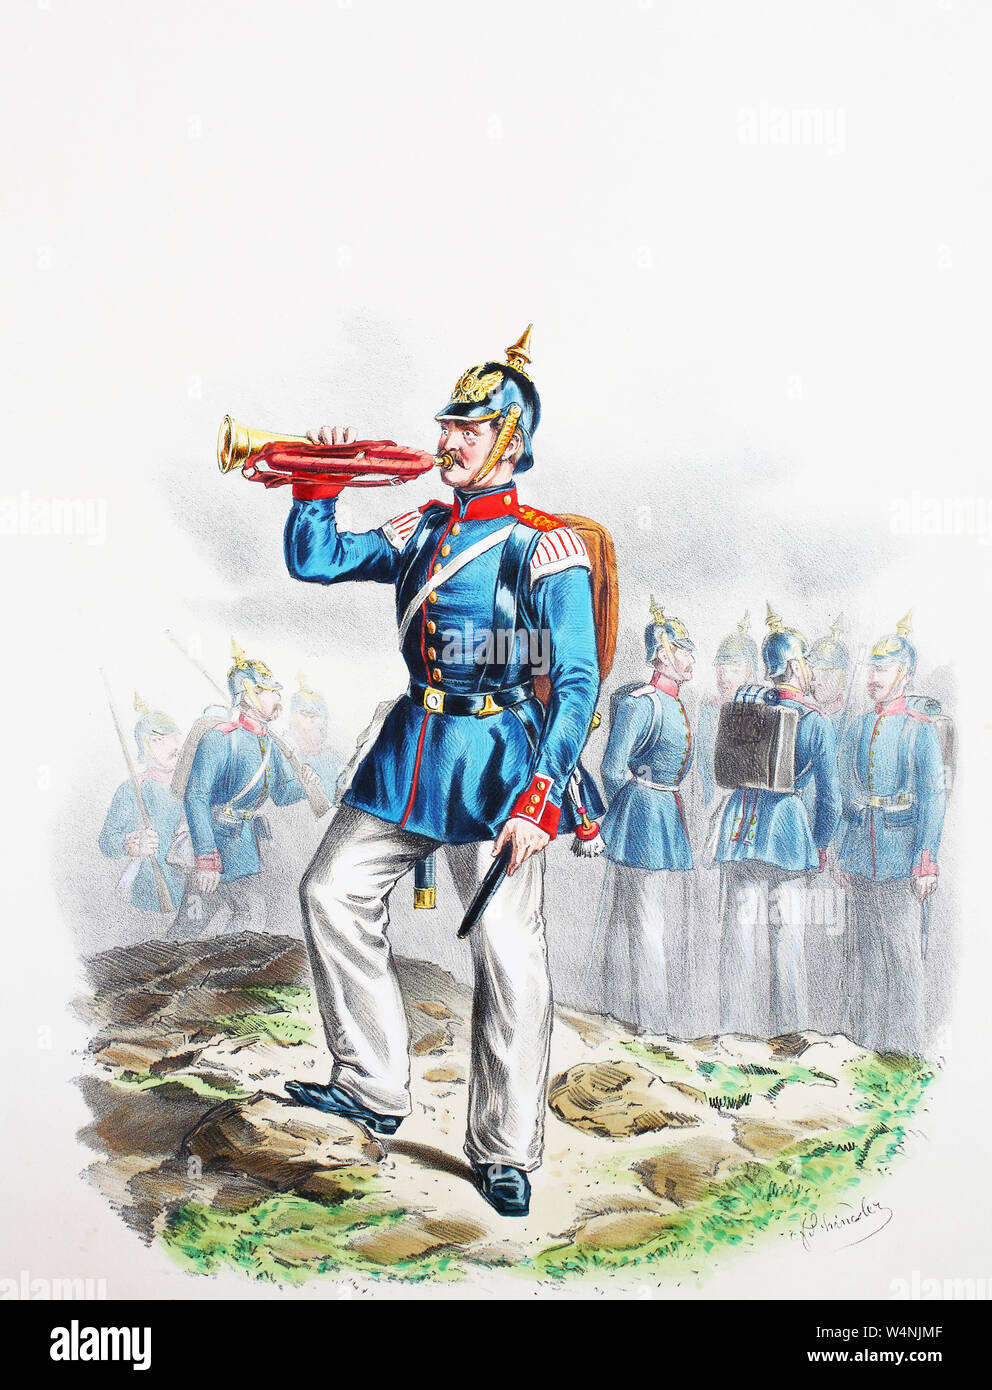 Royal Prussian Army, Guards Corps, Preußens Heer, preussische Garde, Leib-Grenadier Regiment, Brandenburg No. 8, Hornist, Füsilier, Digital improved reproduction of an illustration from the 19th century Stock Photo